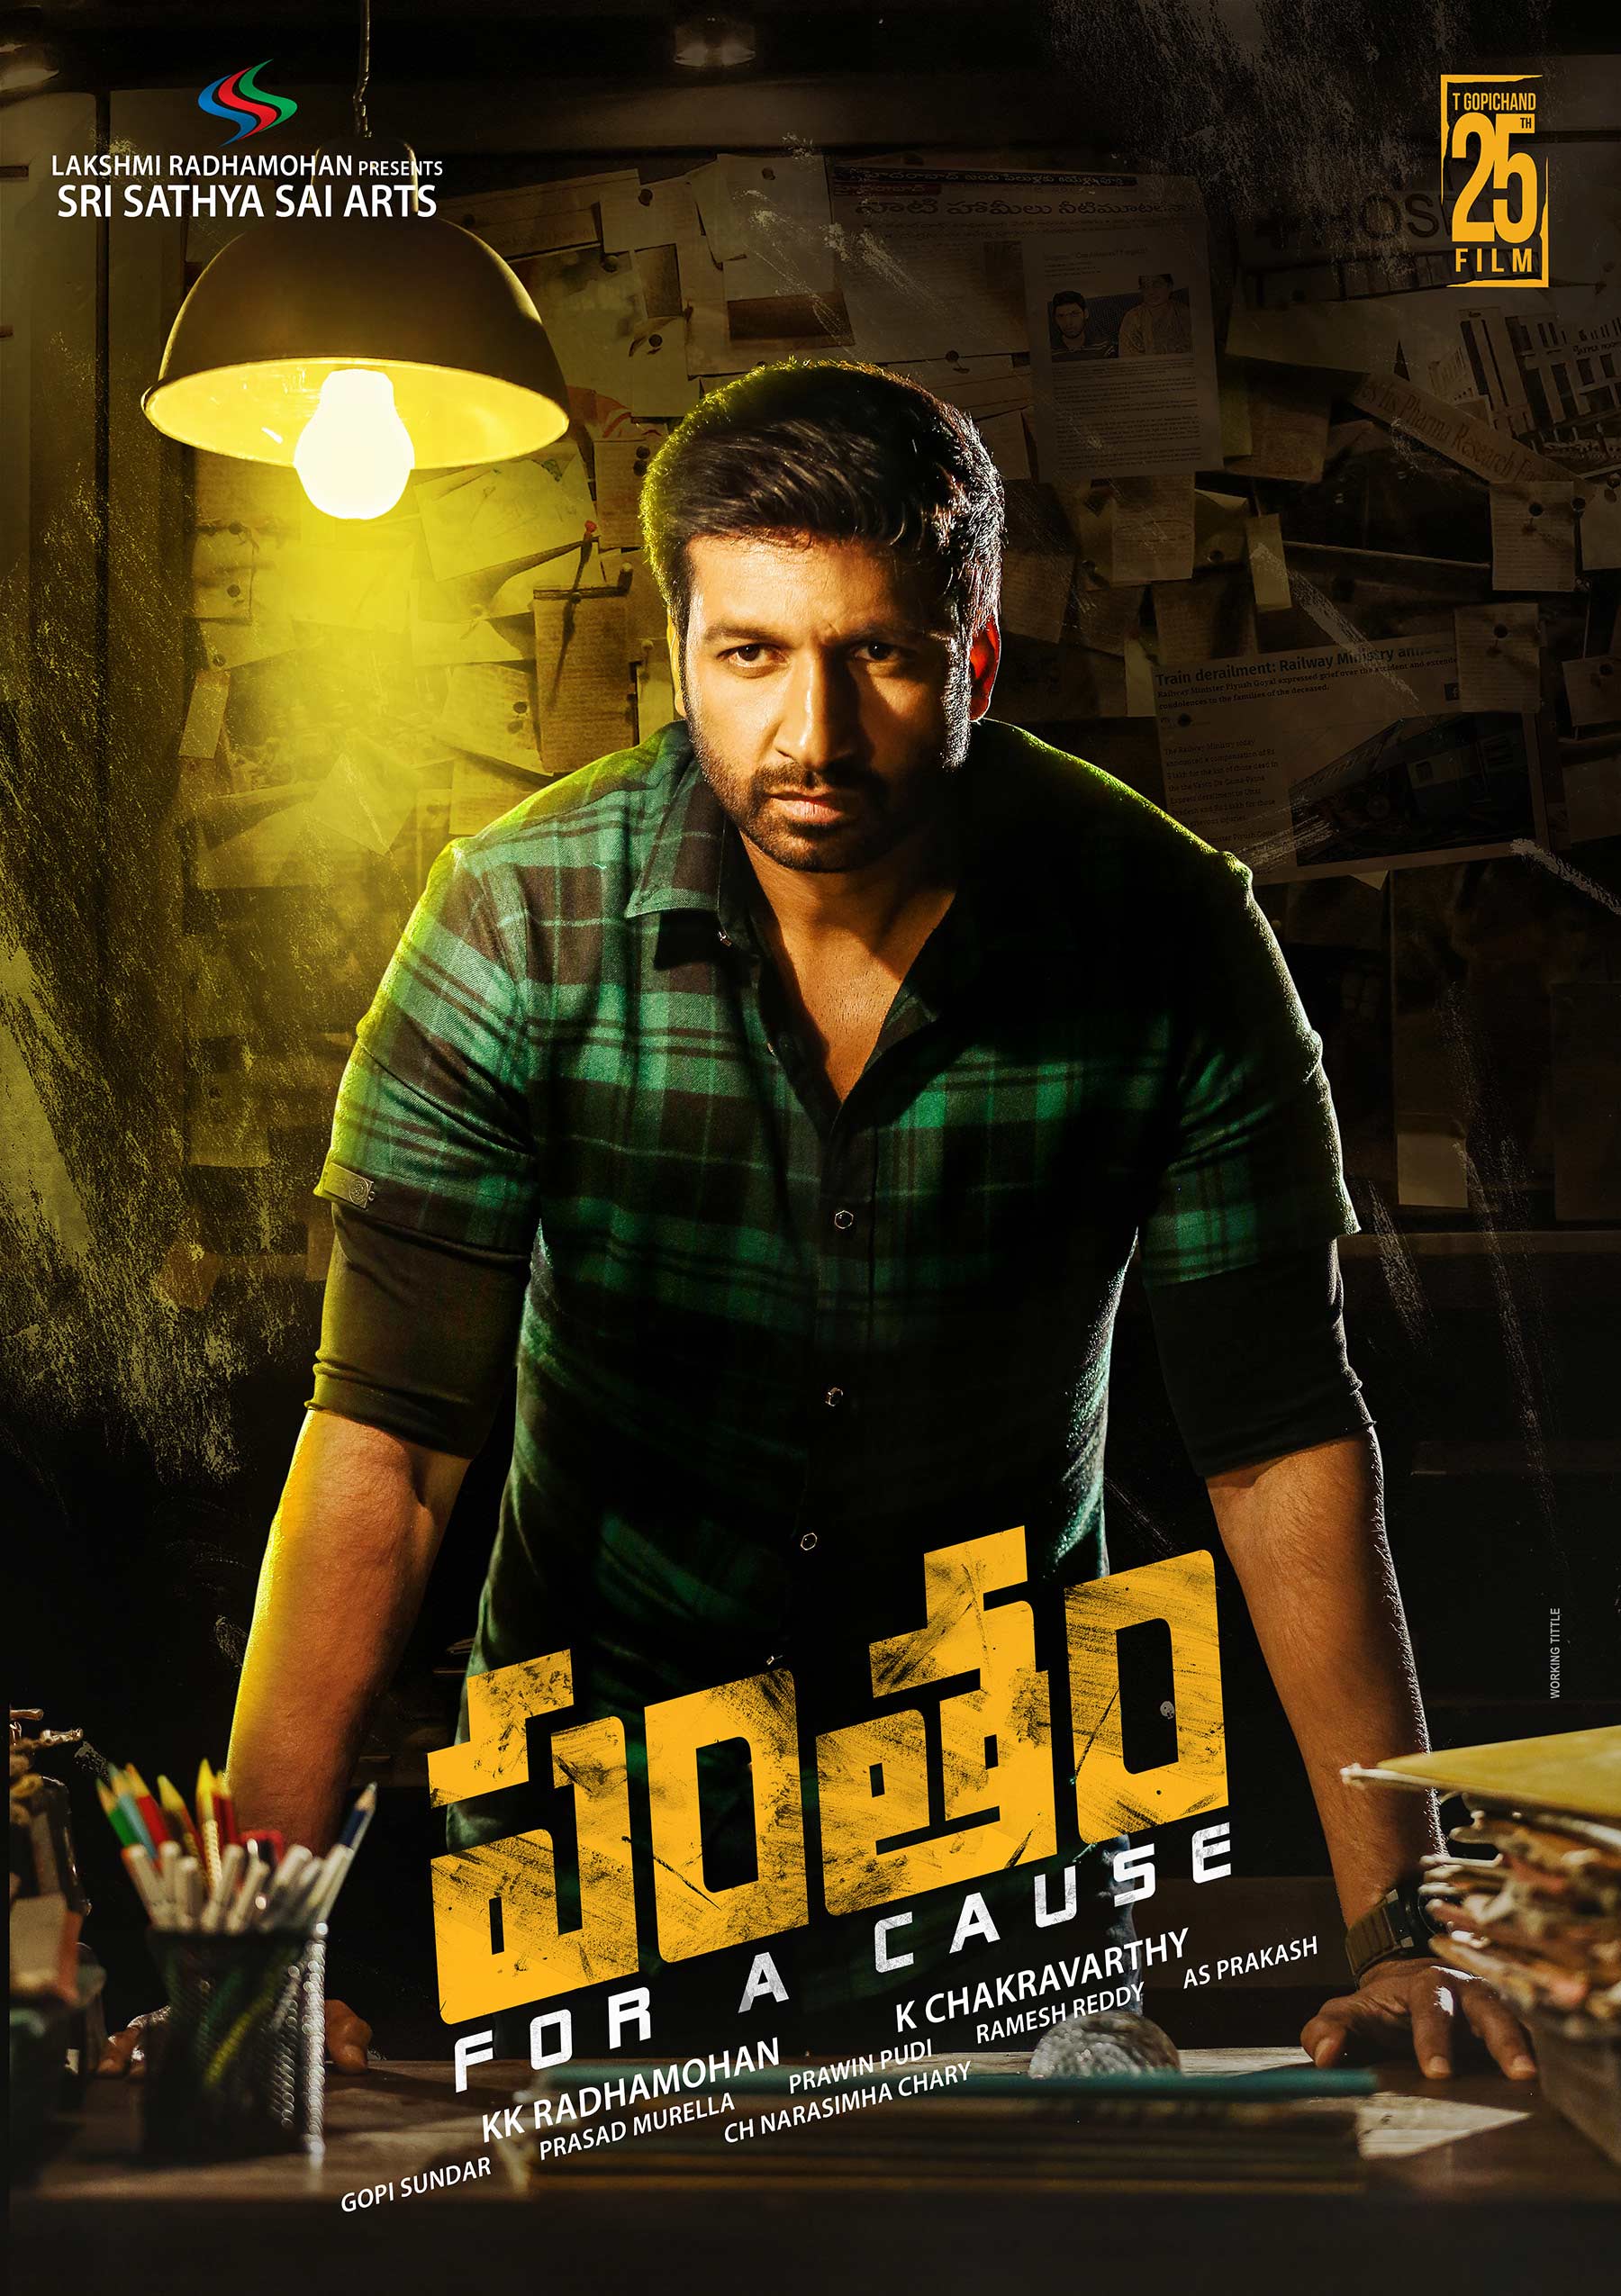 Worldwide release of Pantham on July 5